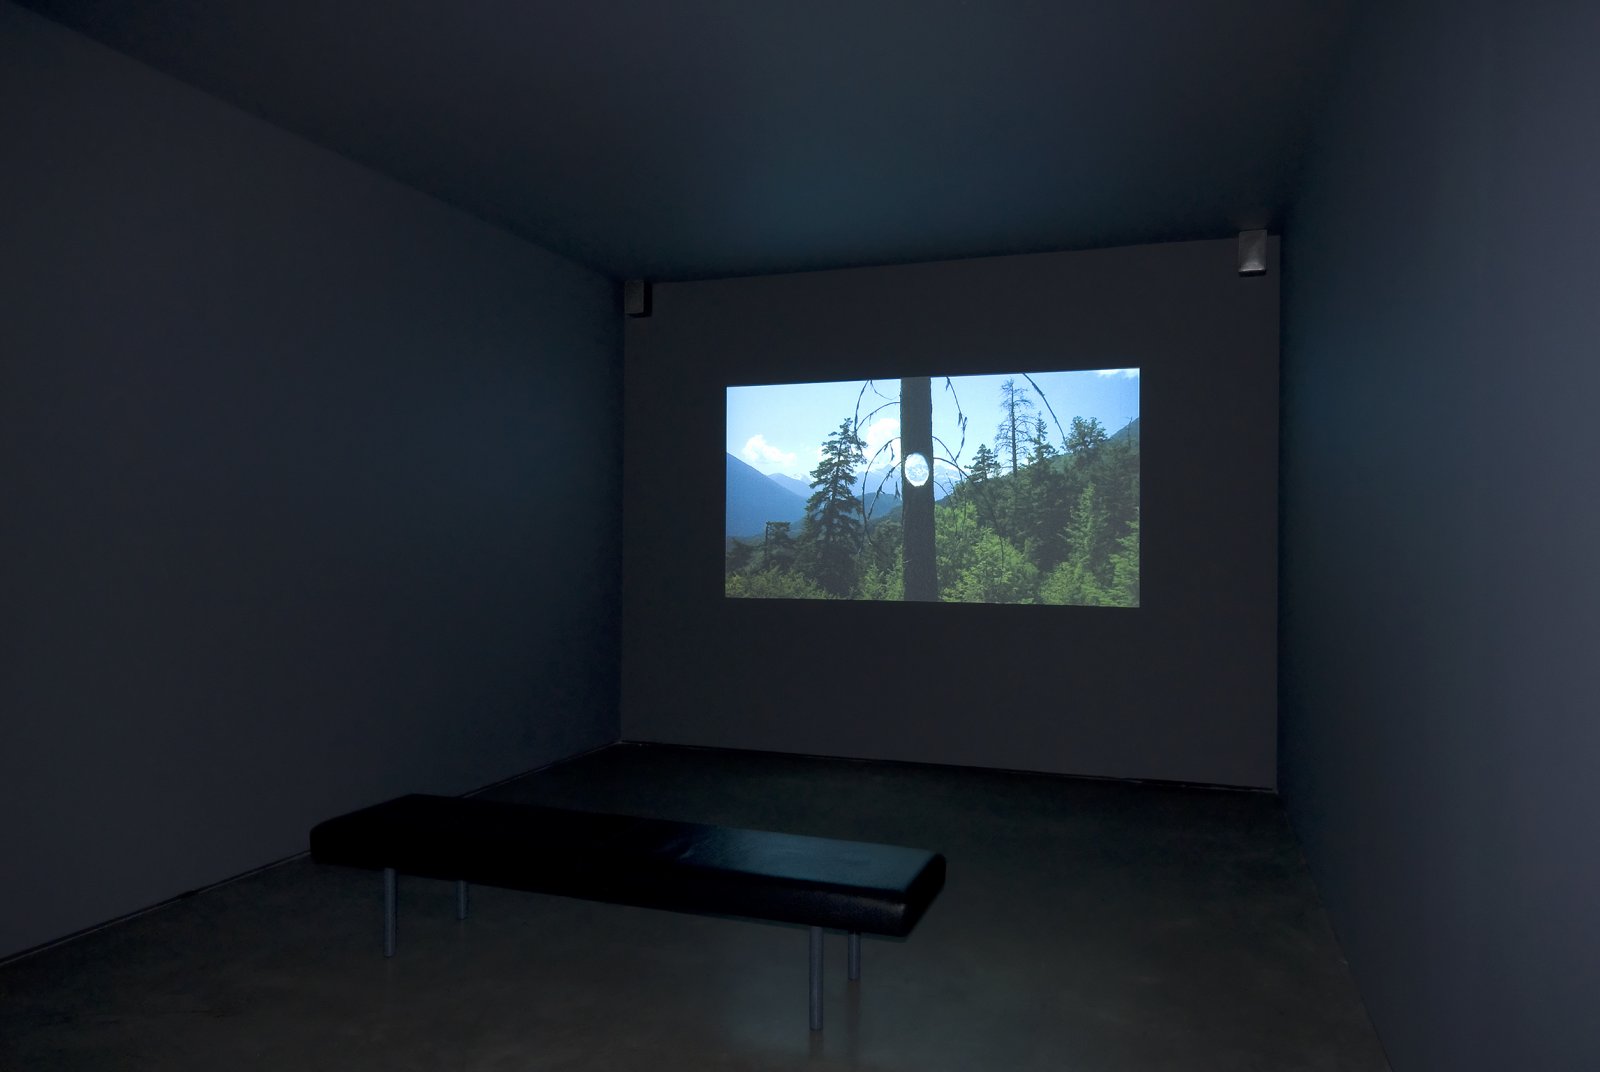 Kevin Schmidt, Disappearing Act, 2009, HD video loop, 12 minutes